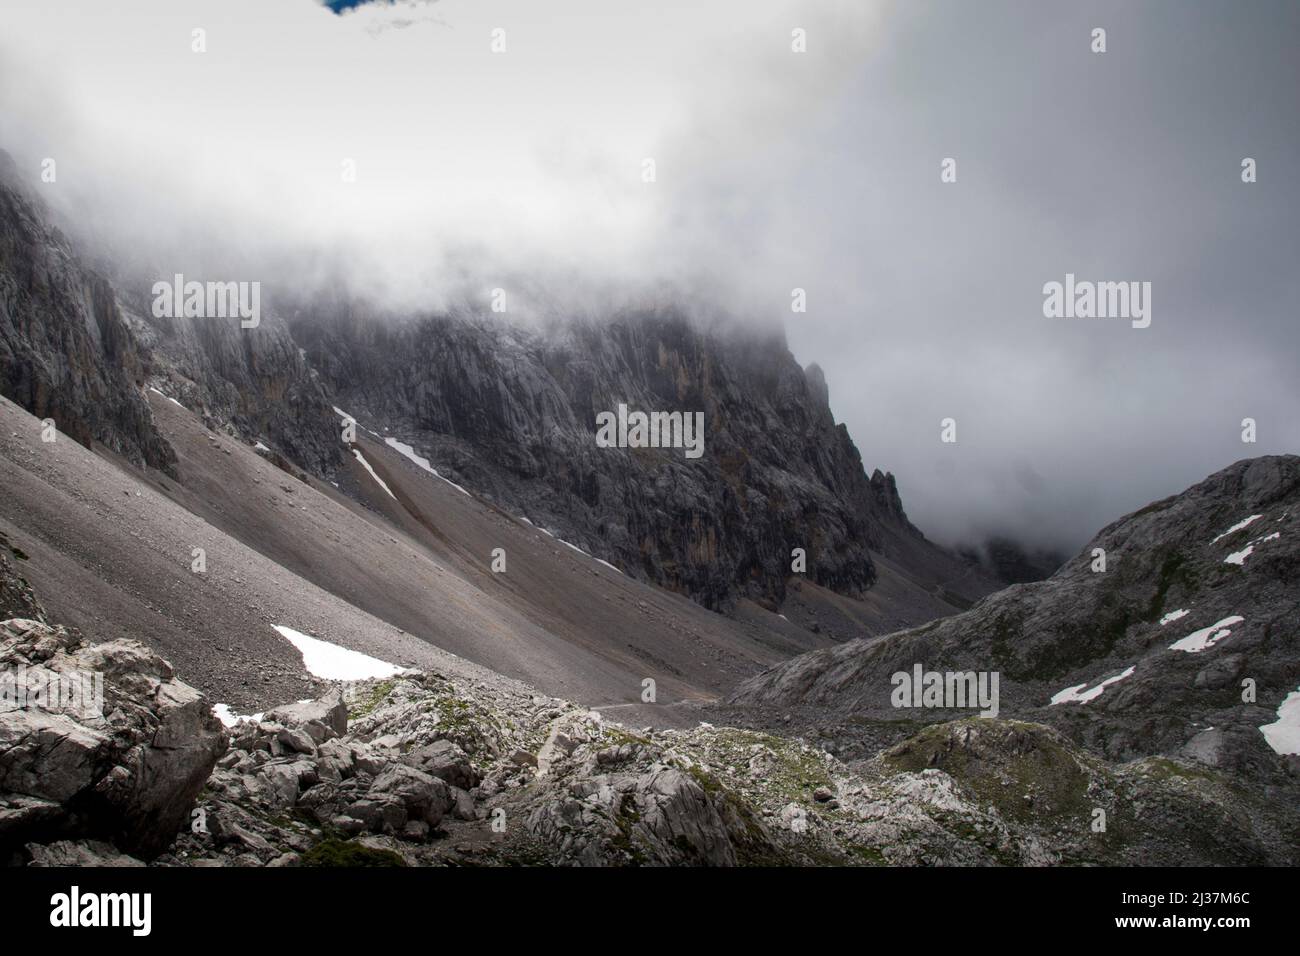 Imposing and majestic sharp limestone peaks stand tall amidst the fog clearing and revealing the light Stock Photo